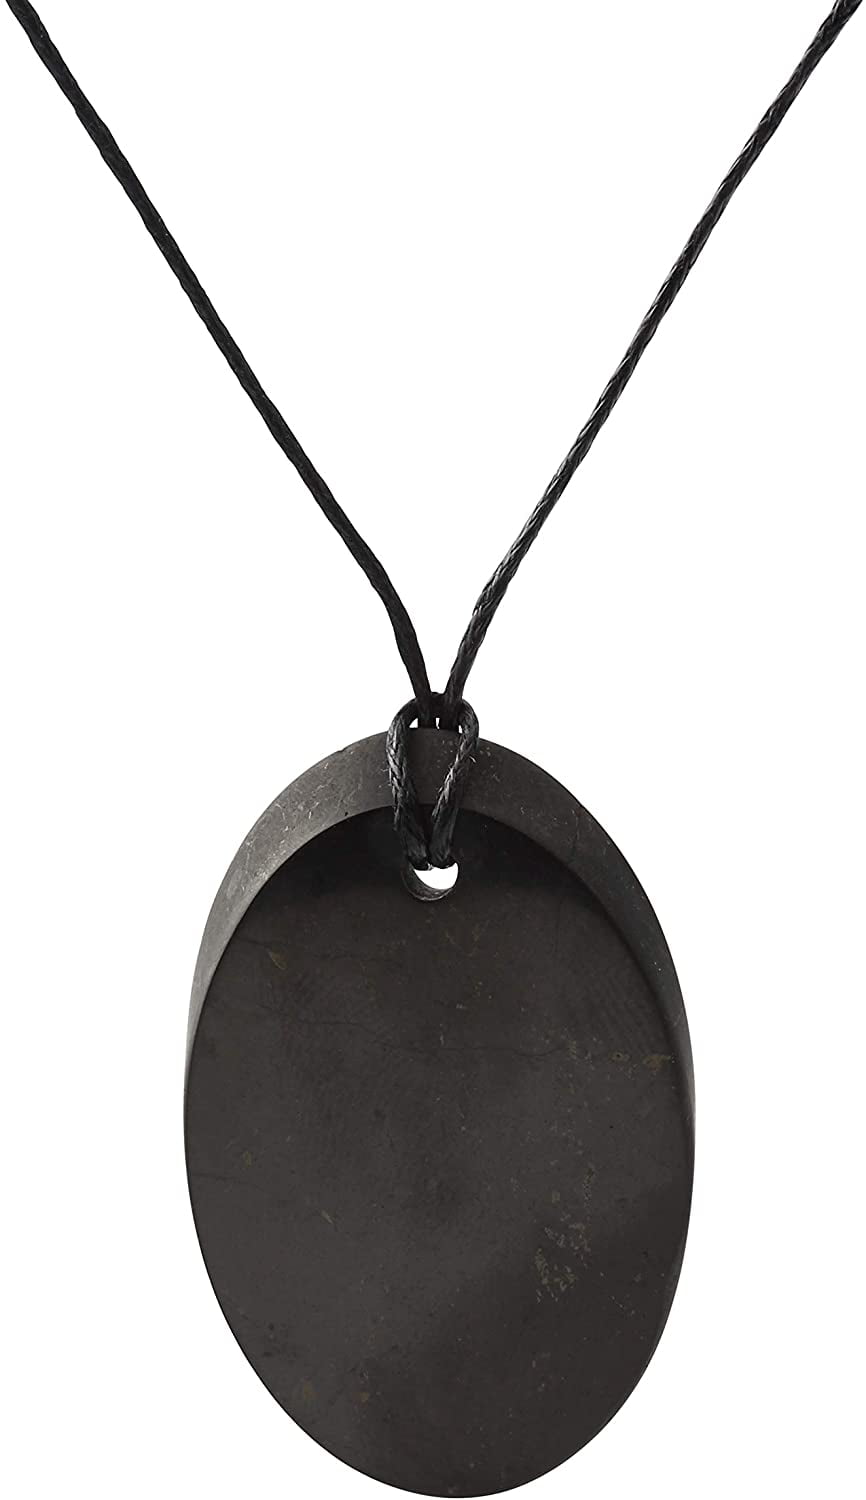 Heka Naturals Shungite Pendant Necklace EMF Protection Pendant Shungite Jewelry is Trendy and Used for Chakra and Energy Balancing 